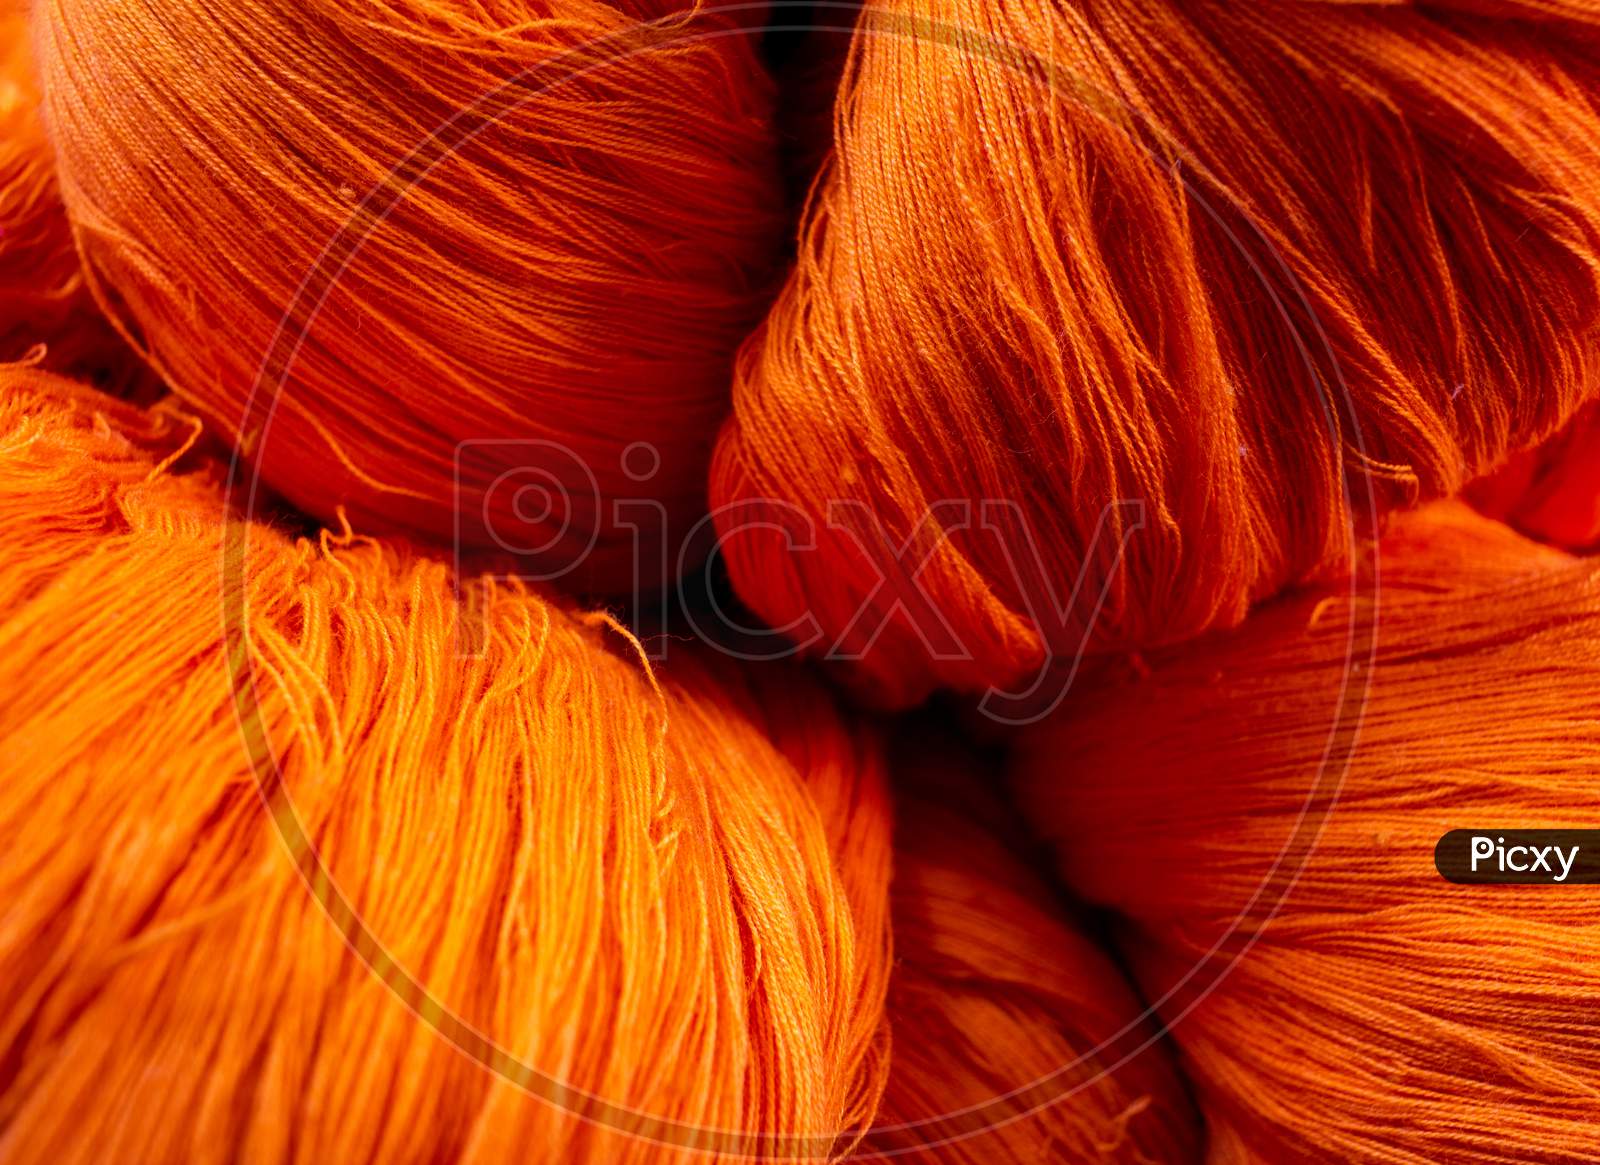 Close View Of The Orange Color Thread Yarns Used In Textile Industry